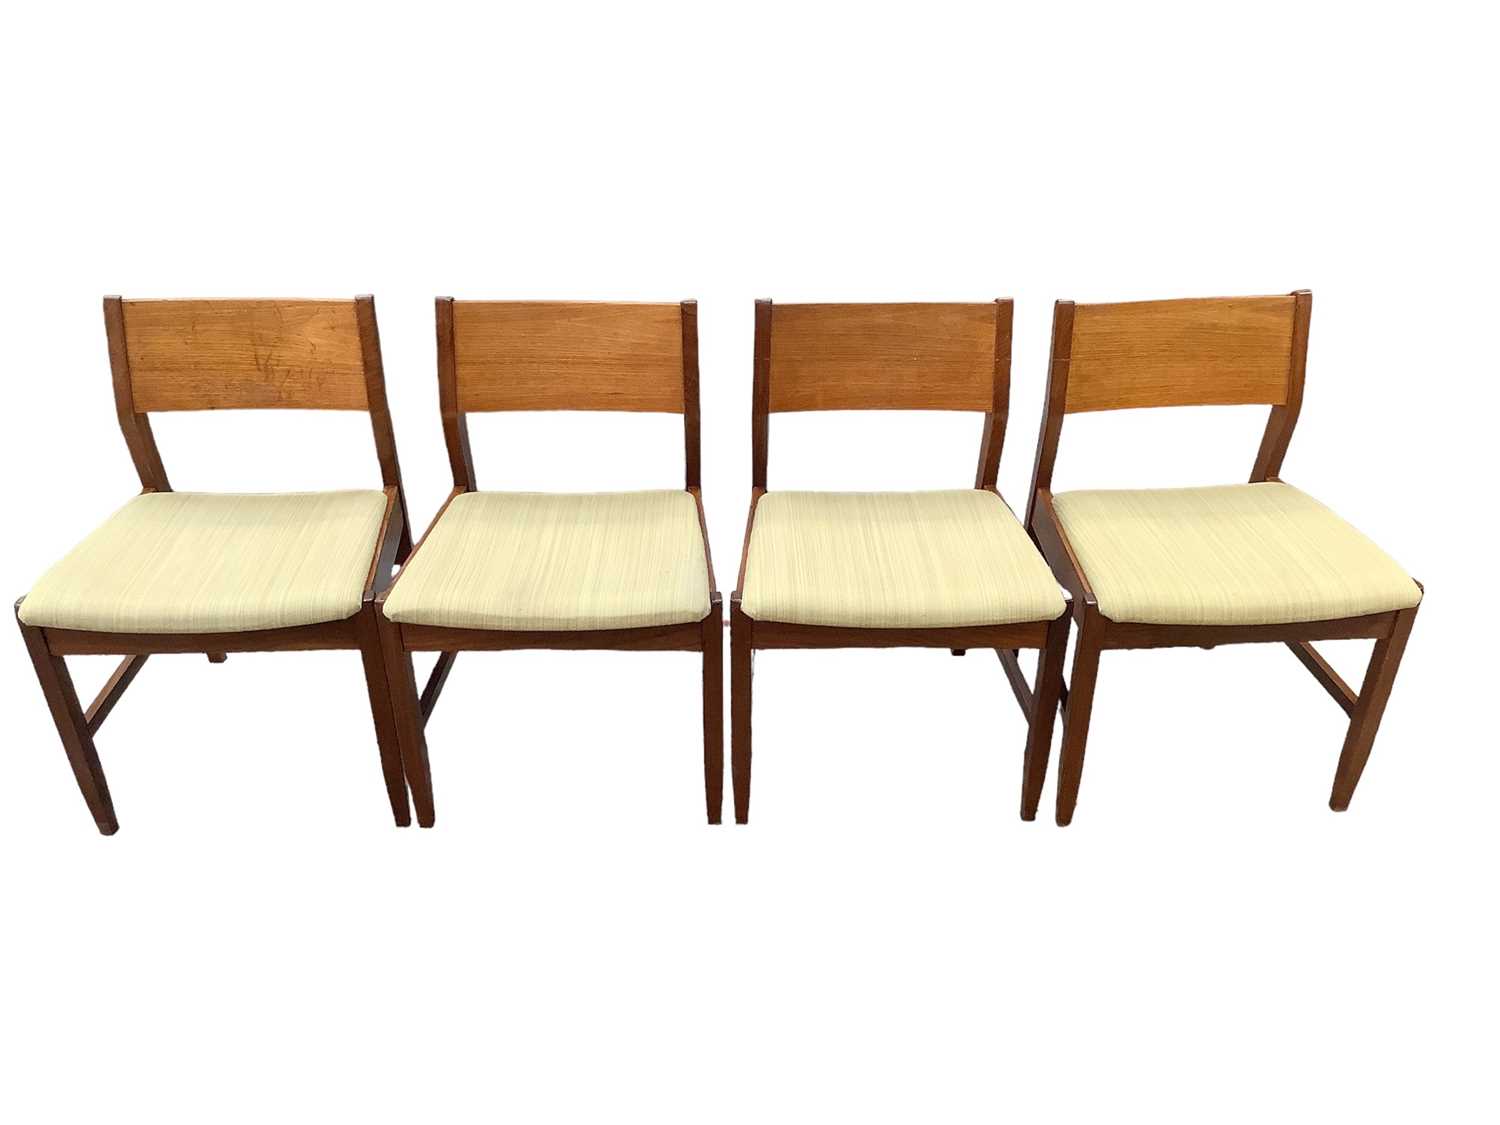 1960s teak table and set of four chairs by Windsor and Newton - Image 2 of 10